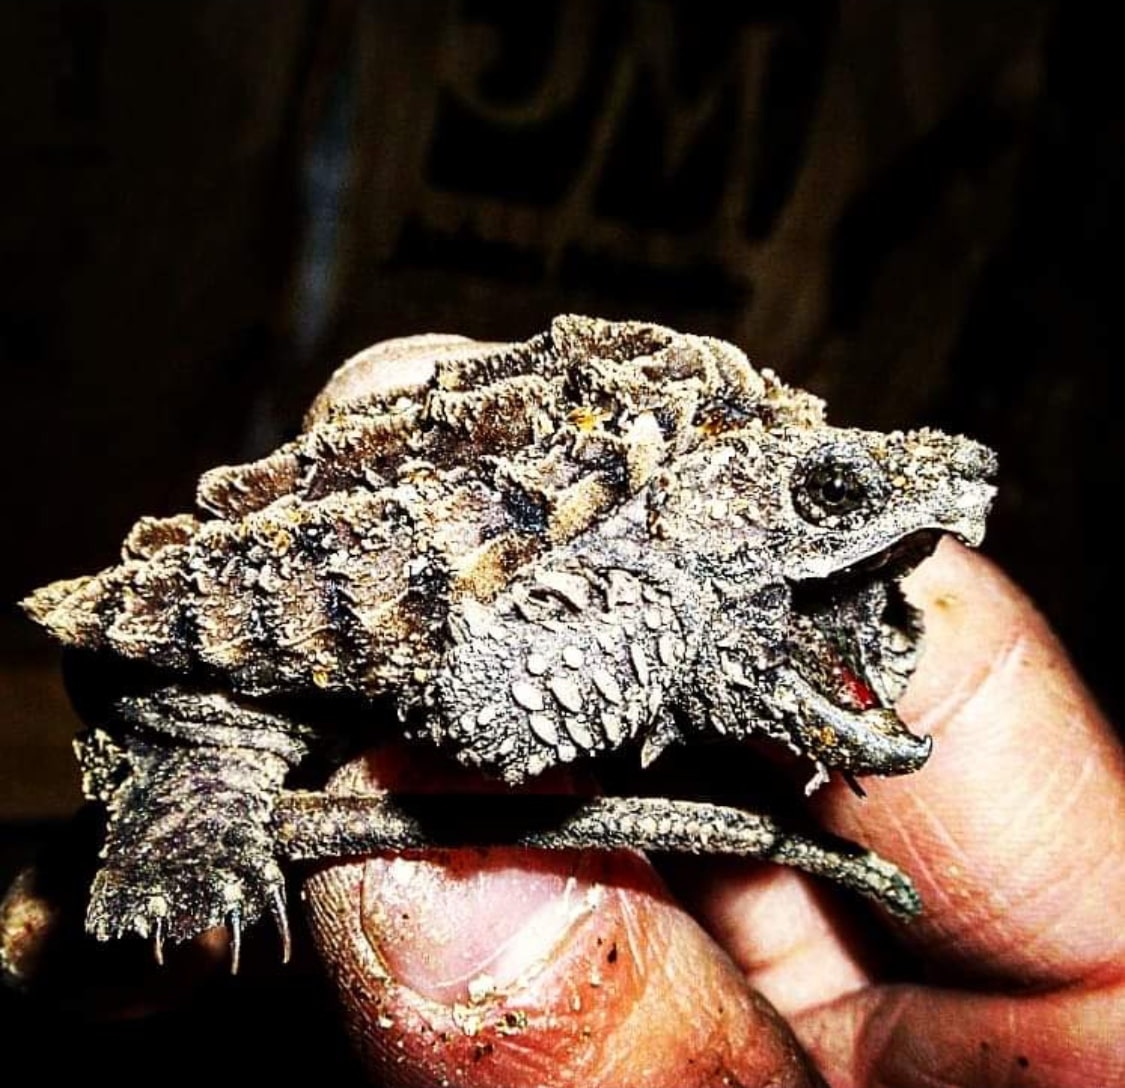 Baby Aligator Snapping Turtle